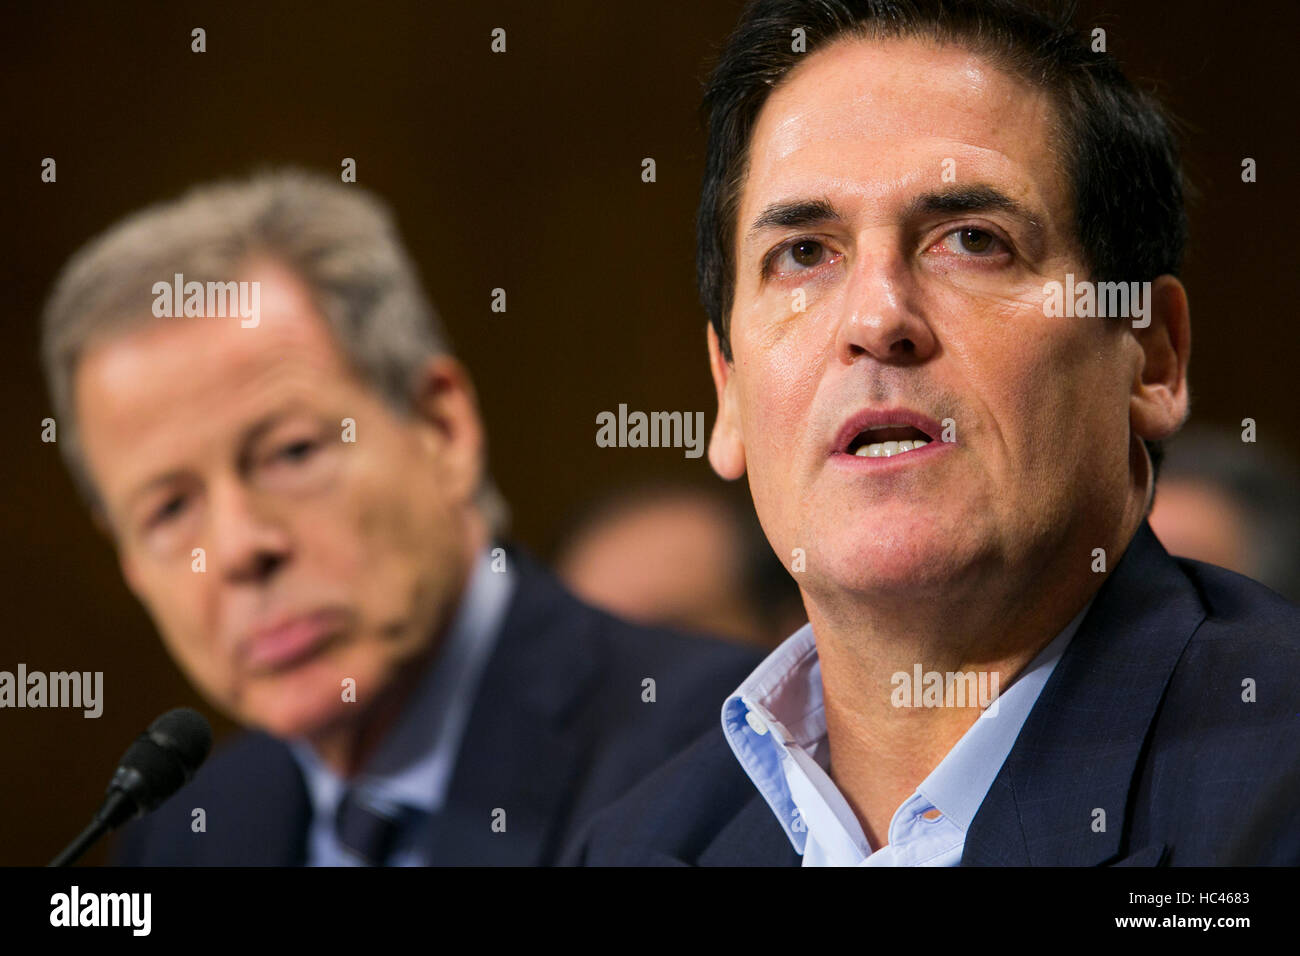 Washington DC, USA. 7th December, 2016. Jeffrey Bewkes, Chairman & CEO, Time Warner, left, and Mark Cuban, Chairman, AXS TV, right, testify before the United States Senate Committee on the Judiciary Subcommittee on Antitrust, Competition Policy & Consumer Rights during a hearing on the pending AT&T and Time Warner merger in Washington, D.C. on December 7, 2016. Credit:  Kristoffer Tripplaar/Alamy Live News Stock Photo